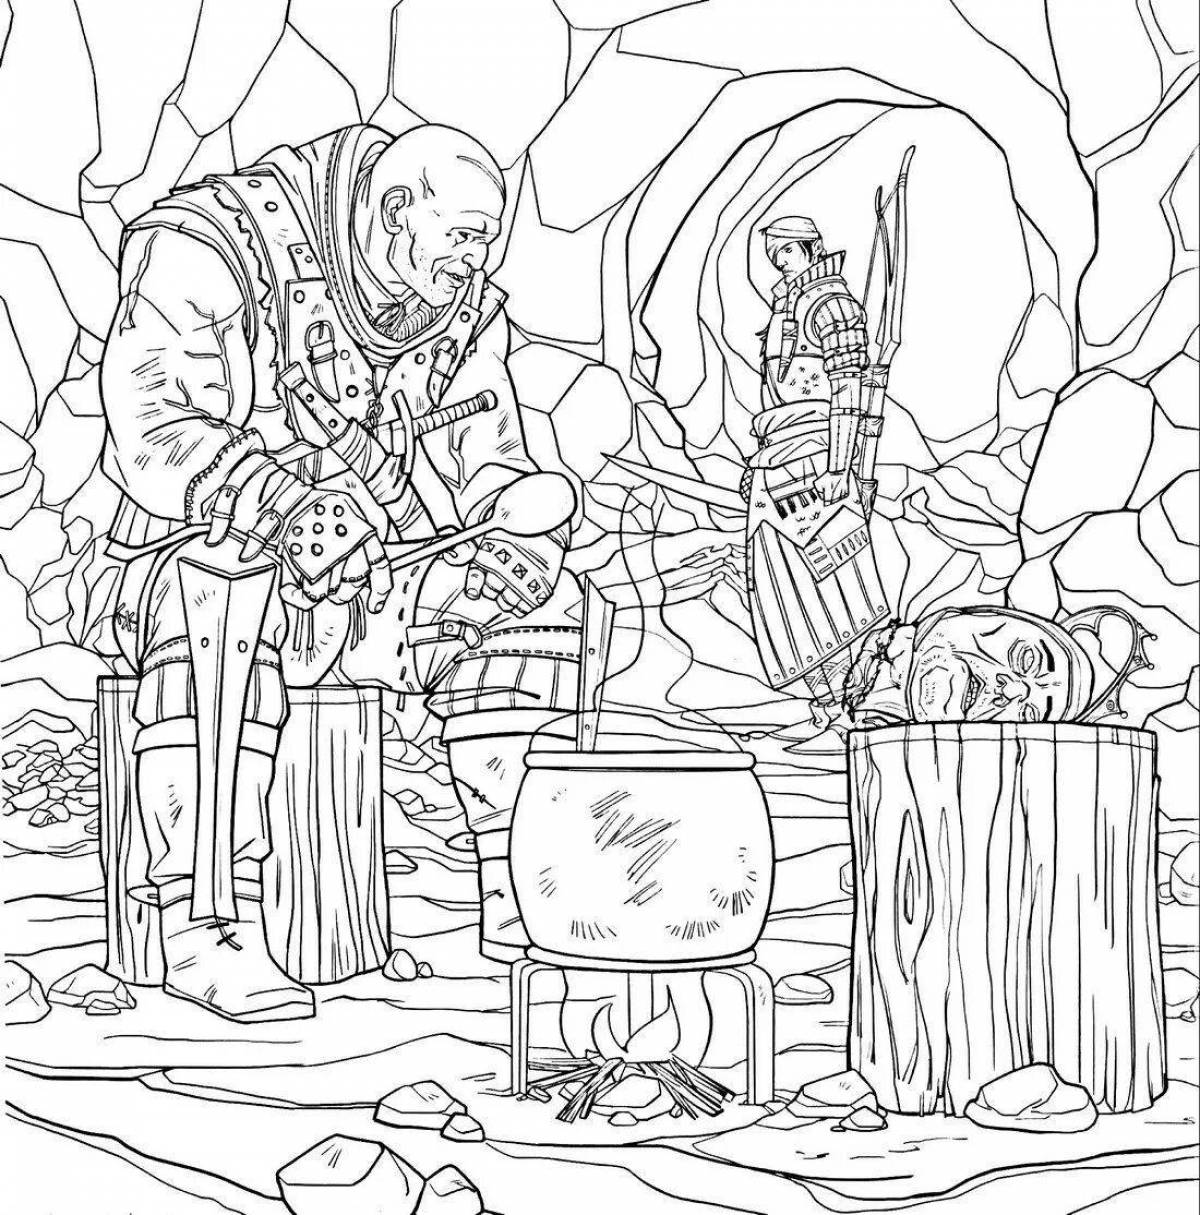 Glorious Witcher 3 coloring book